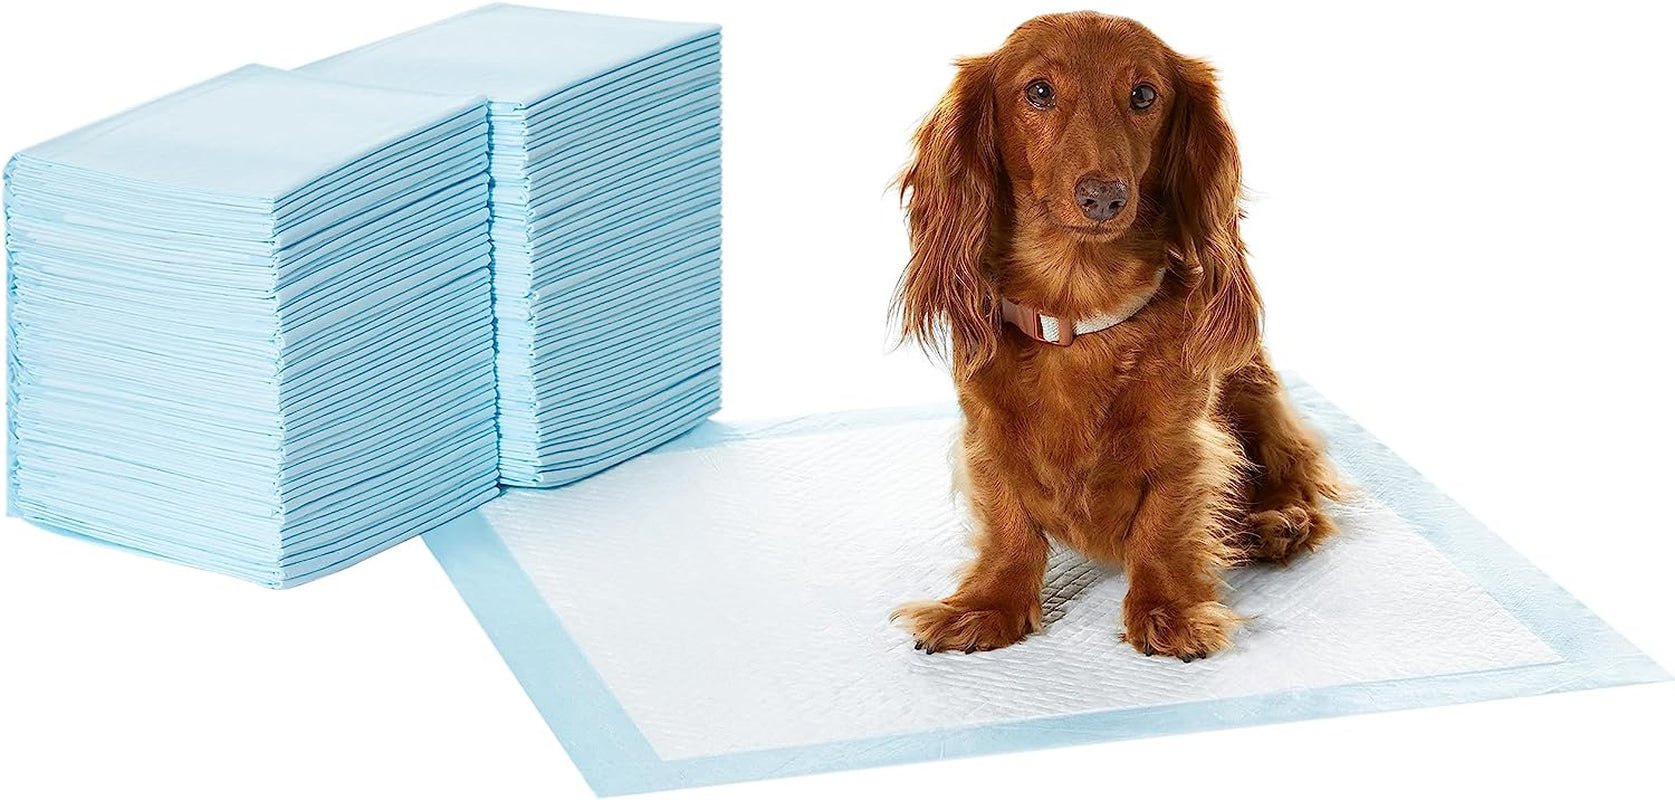 Dog and Puppy Pee Pads with Leak-Proof Quick-Dry Design for Potty Training, Standard Absorbency, Regular Size, 22 X 22 Inches, Pack of 100, Blue & White - PETGS